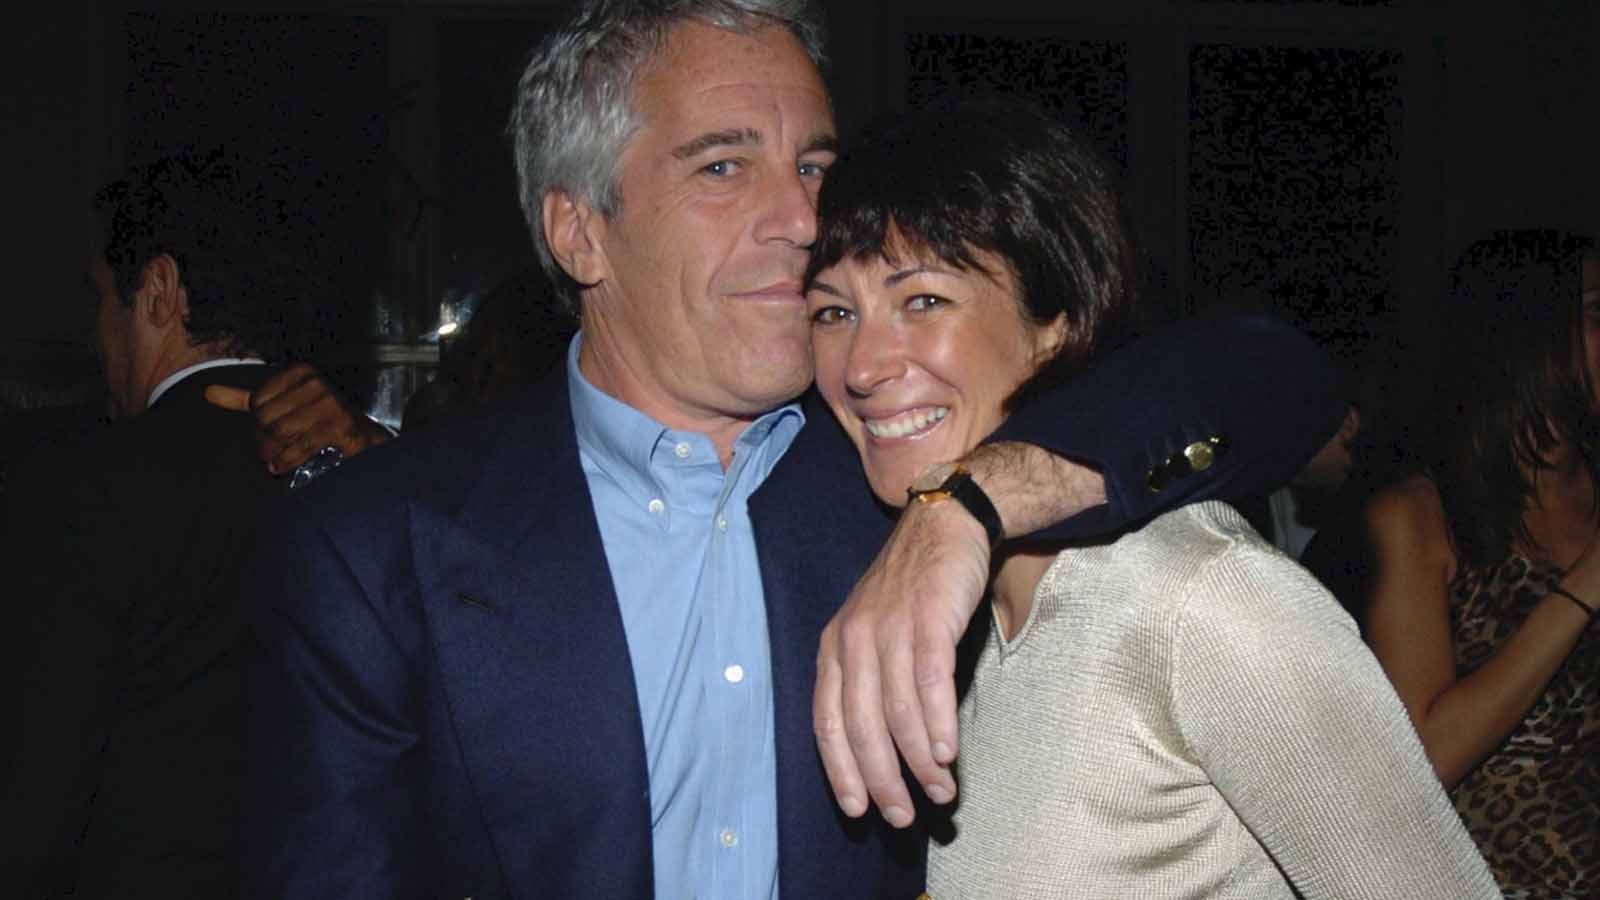 Ghislaine Maxwell couldn't stop the release of documents from her 2015 lawsuit, and so a lot of Jeffrey Epstein facts in the news have been proven false.